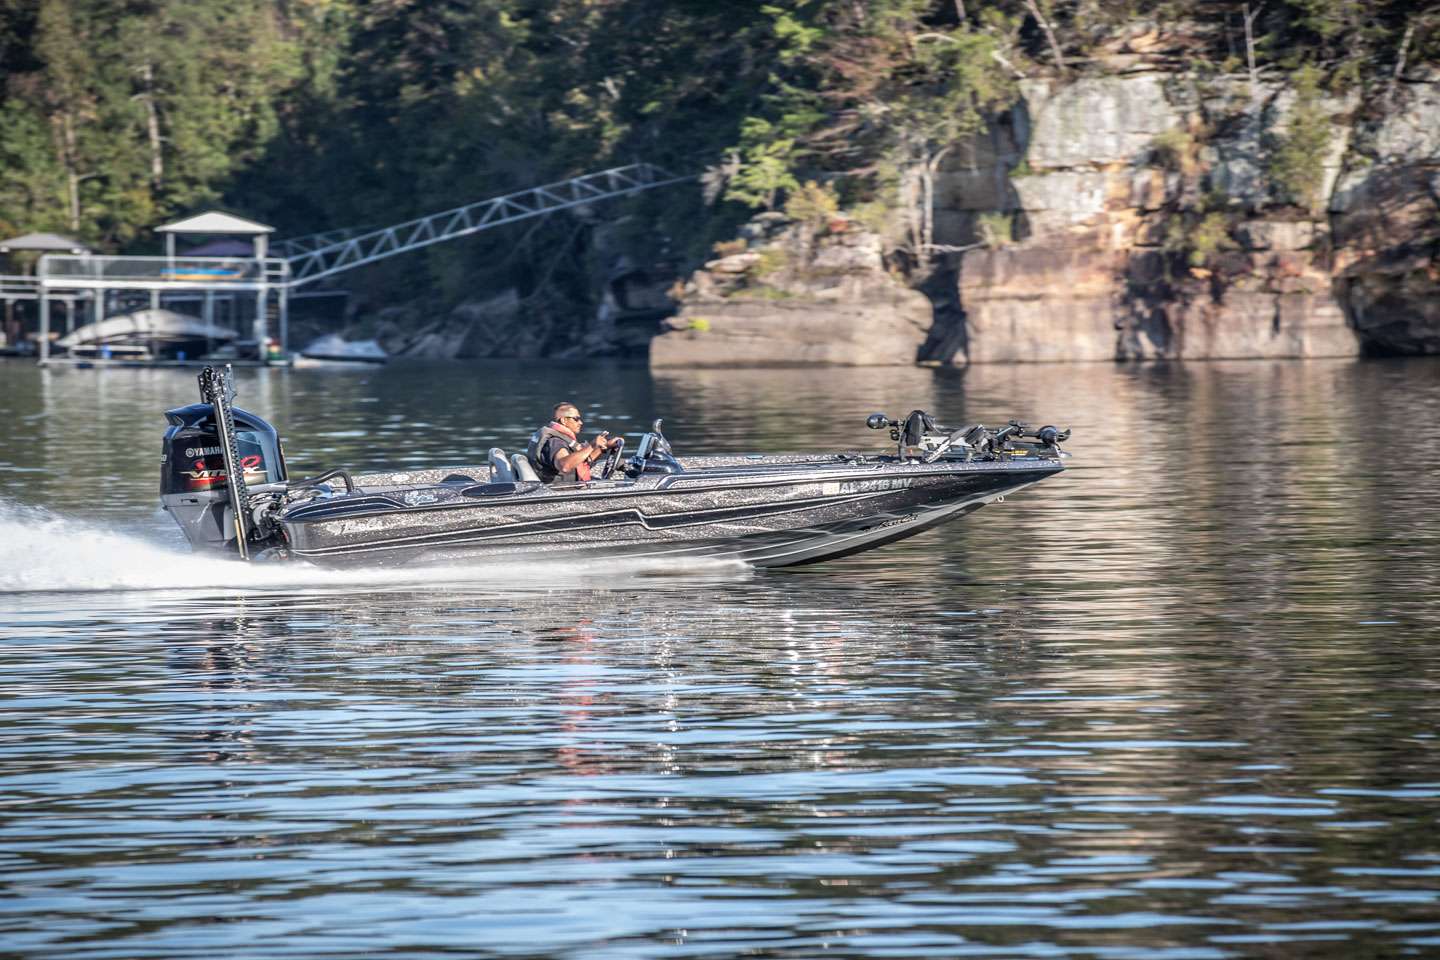 Check out the early action on Day 2 of the Basspro.com Bassmaster Open at Lewis Smith Lake. 